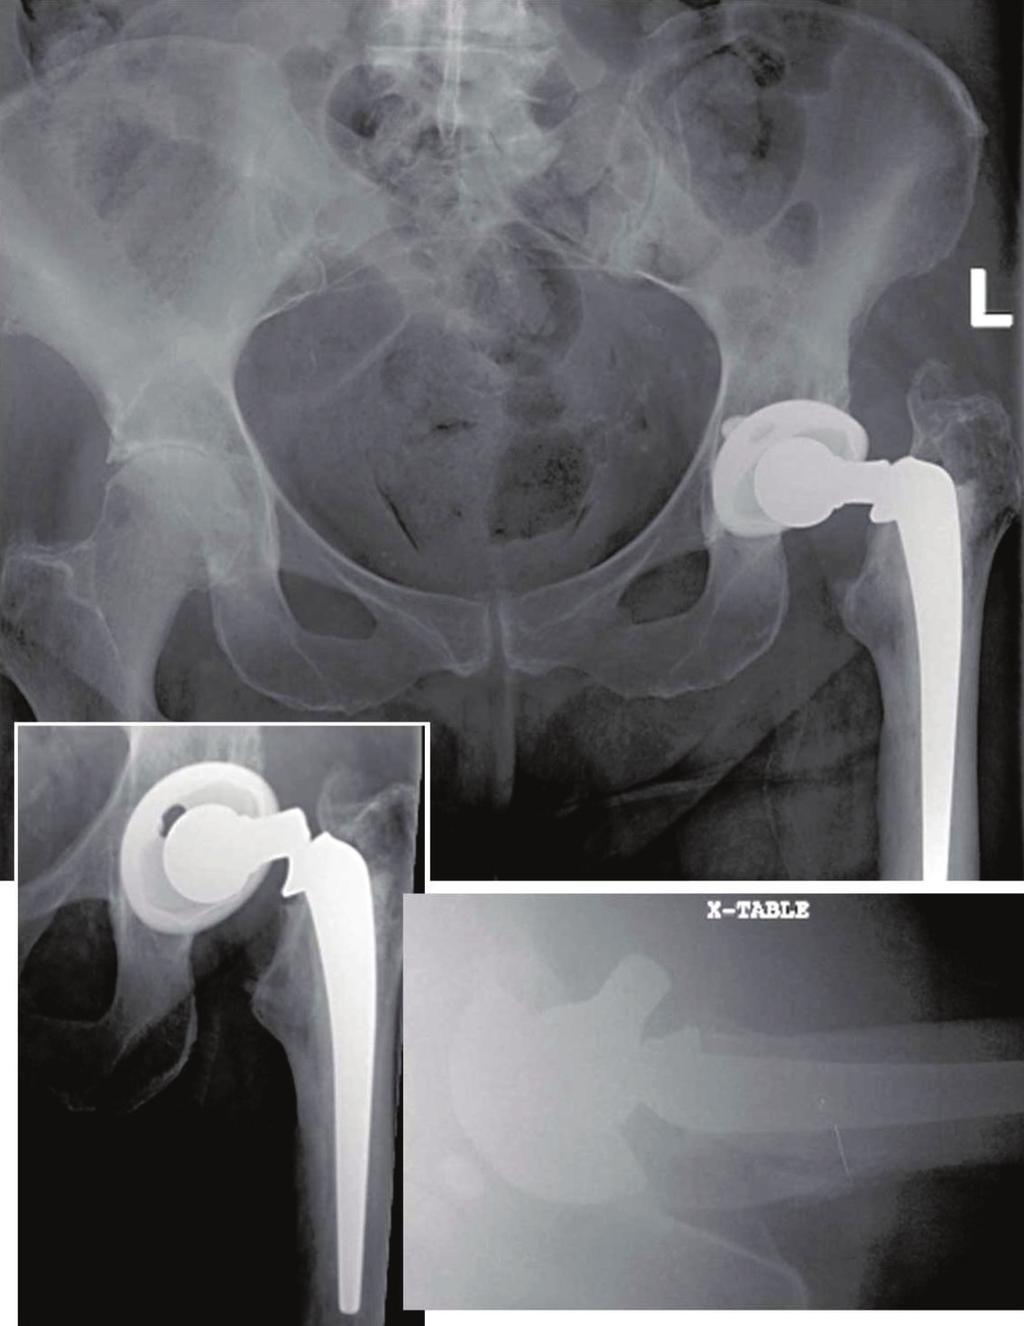 2 Case Reports in Orthopedics Figure 1: Admission radiographs show femoral component fracture at the neck-shoulder junction at 12 years after implantation. was unaffected.